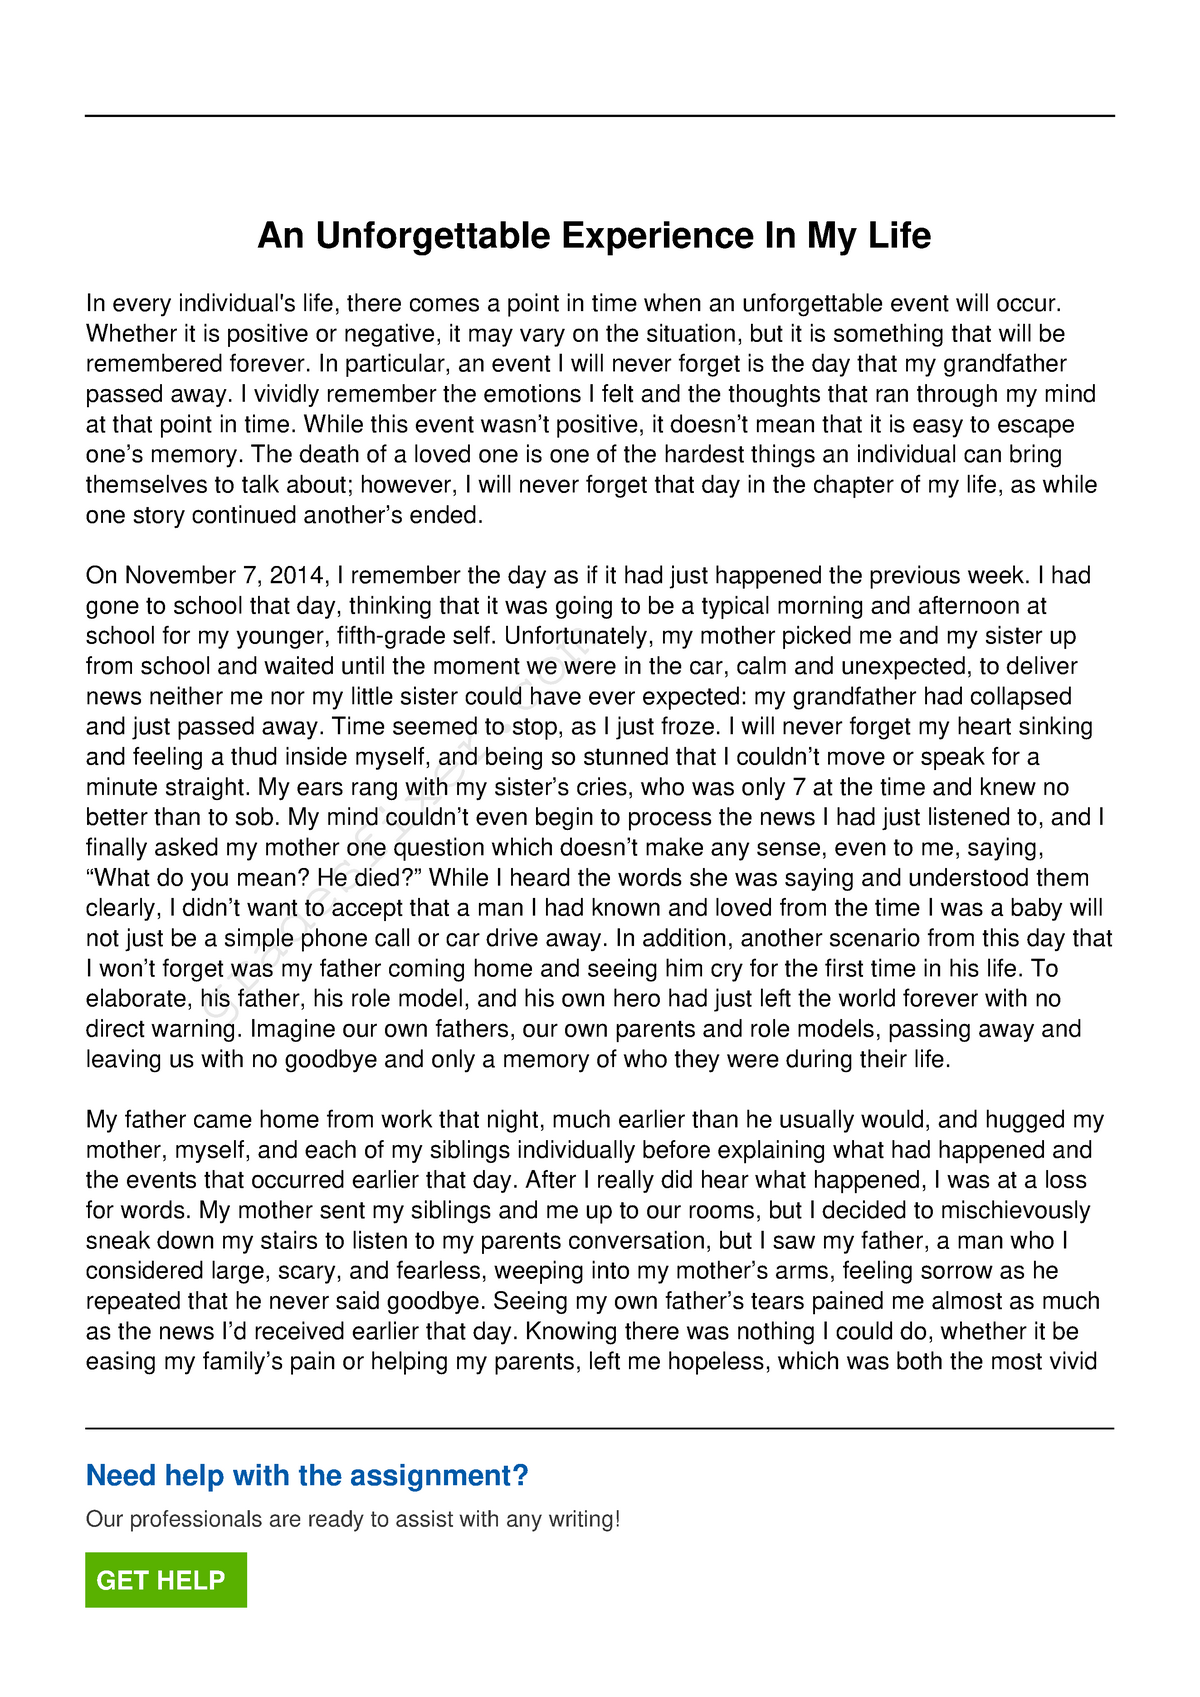 essay about unforgettable experience in my life